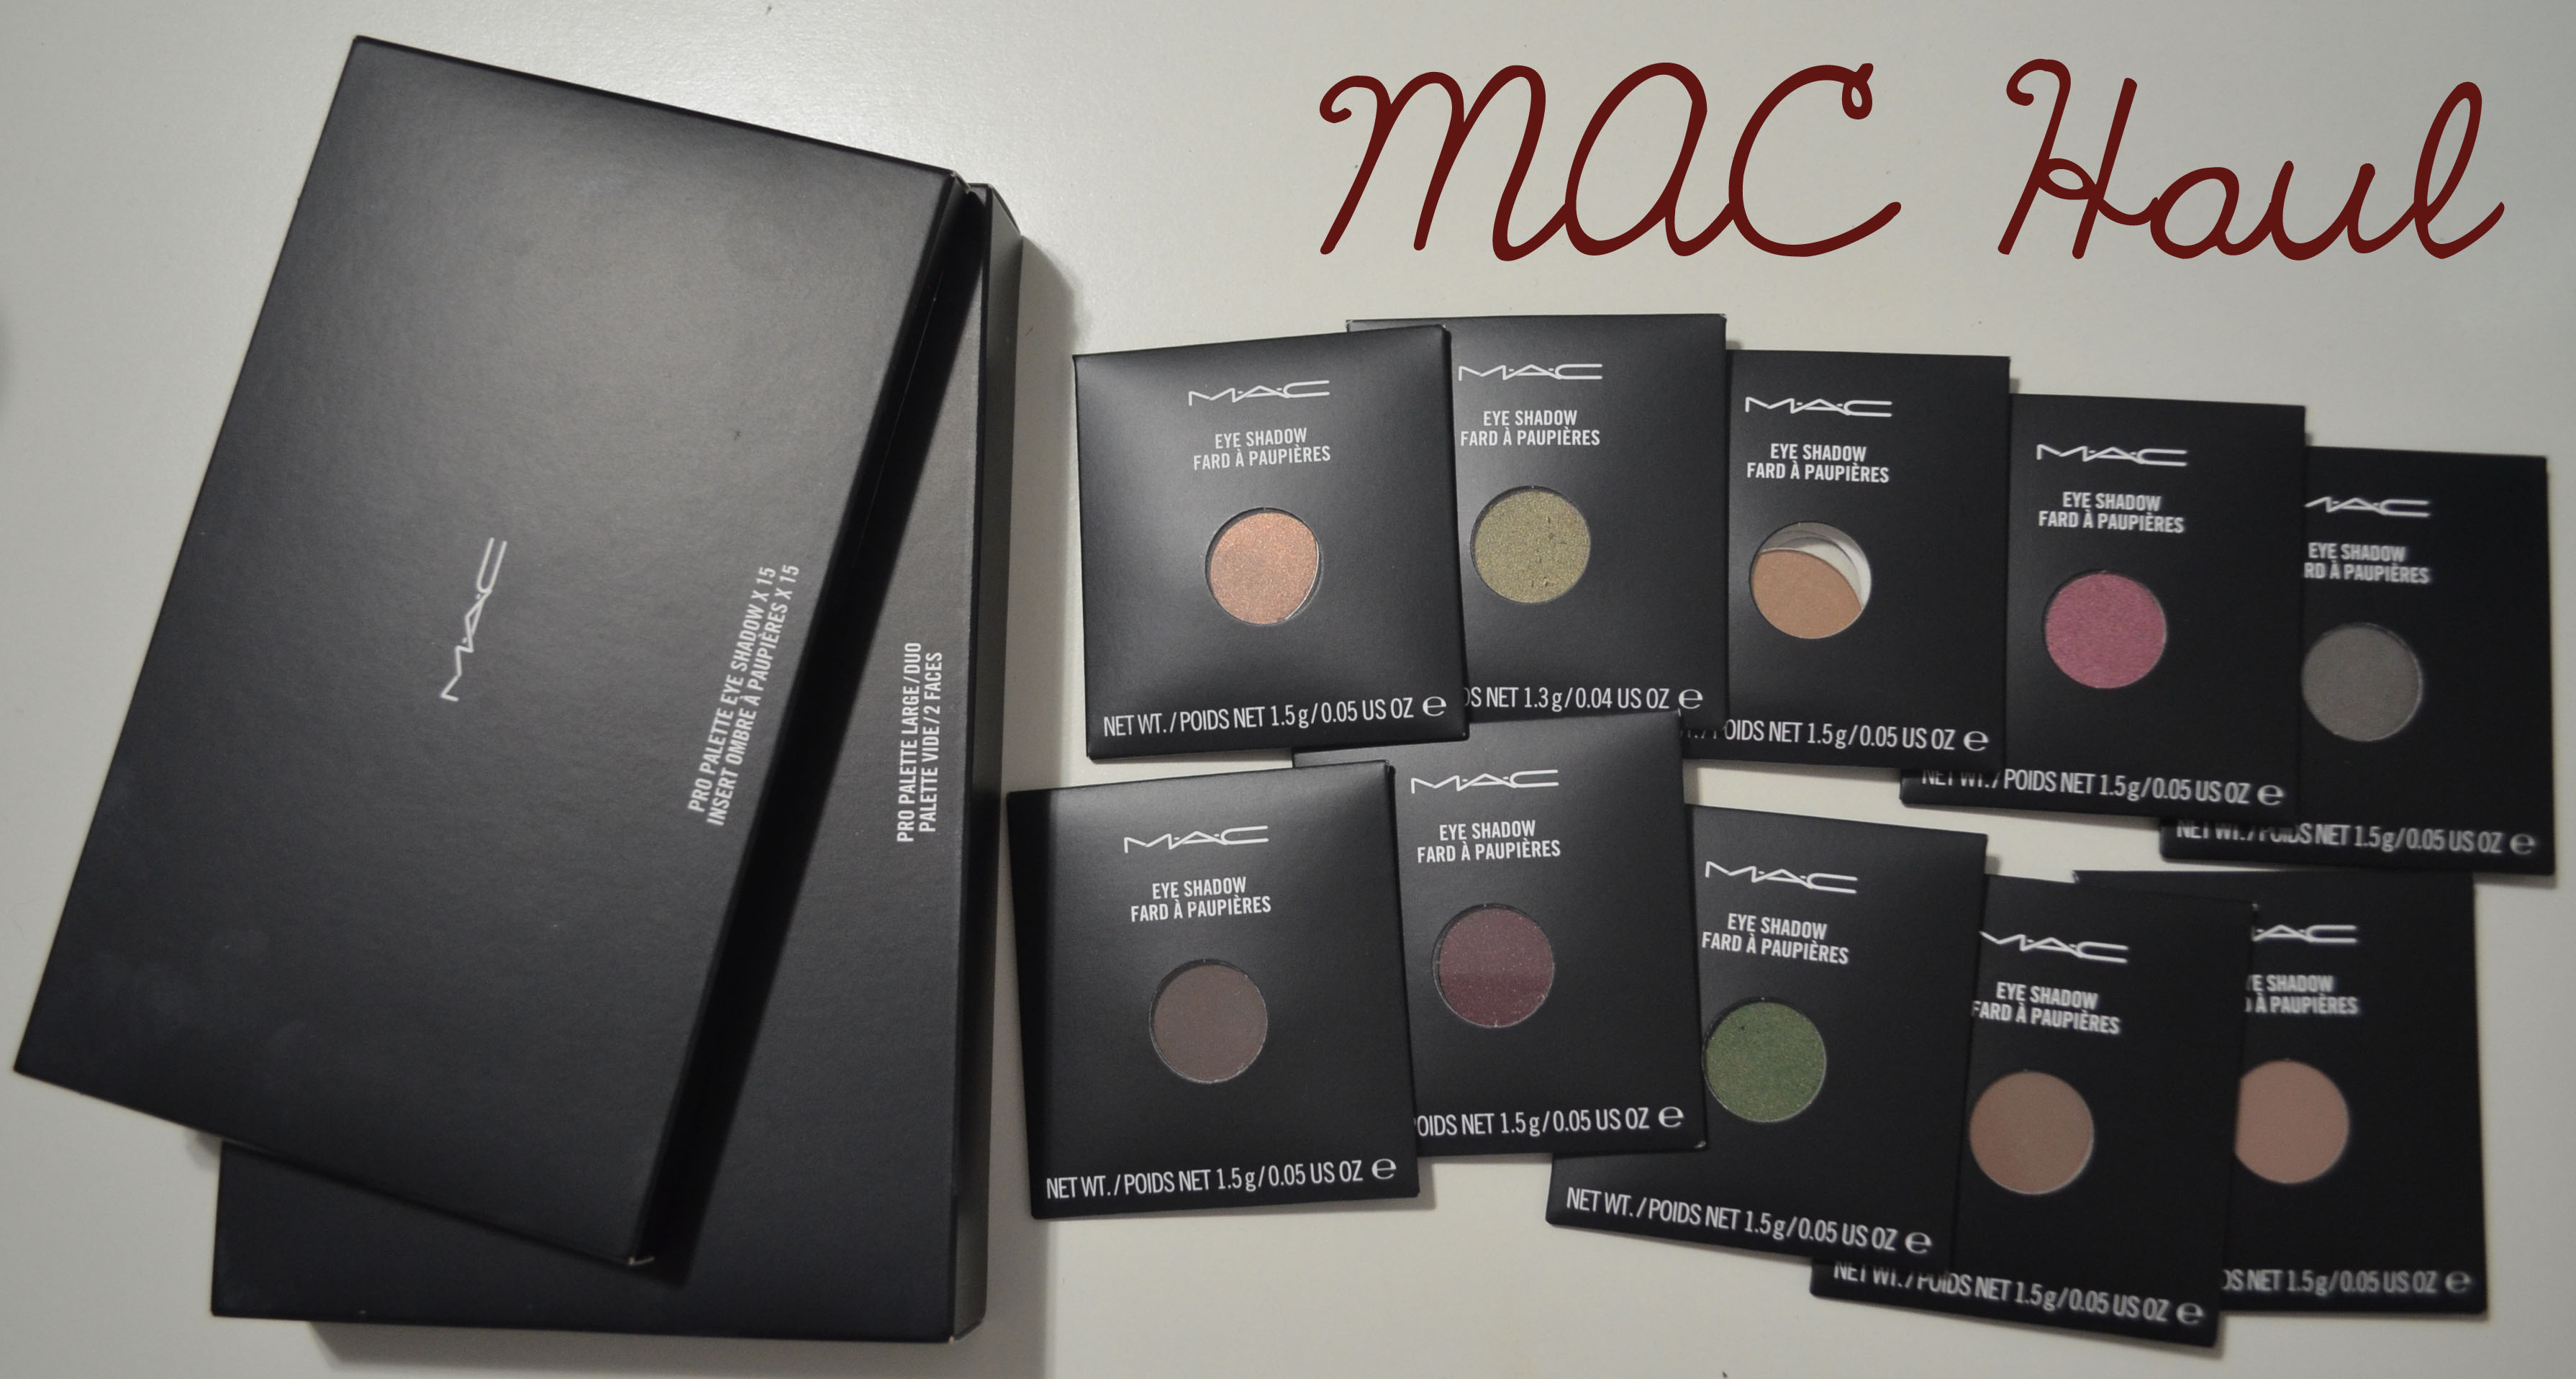 nevø dis at føre Price USA Haul #2, MAC Pro Store, and a small rant. | Hello Micha